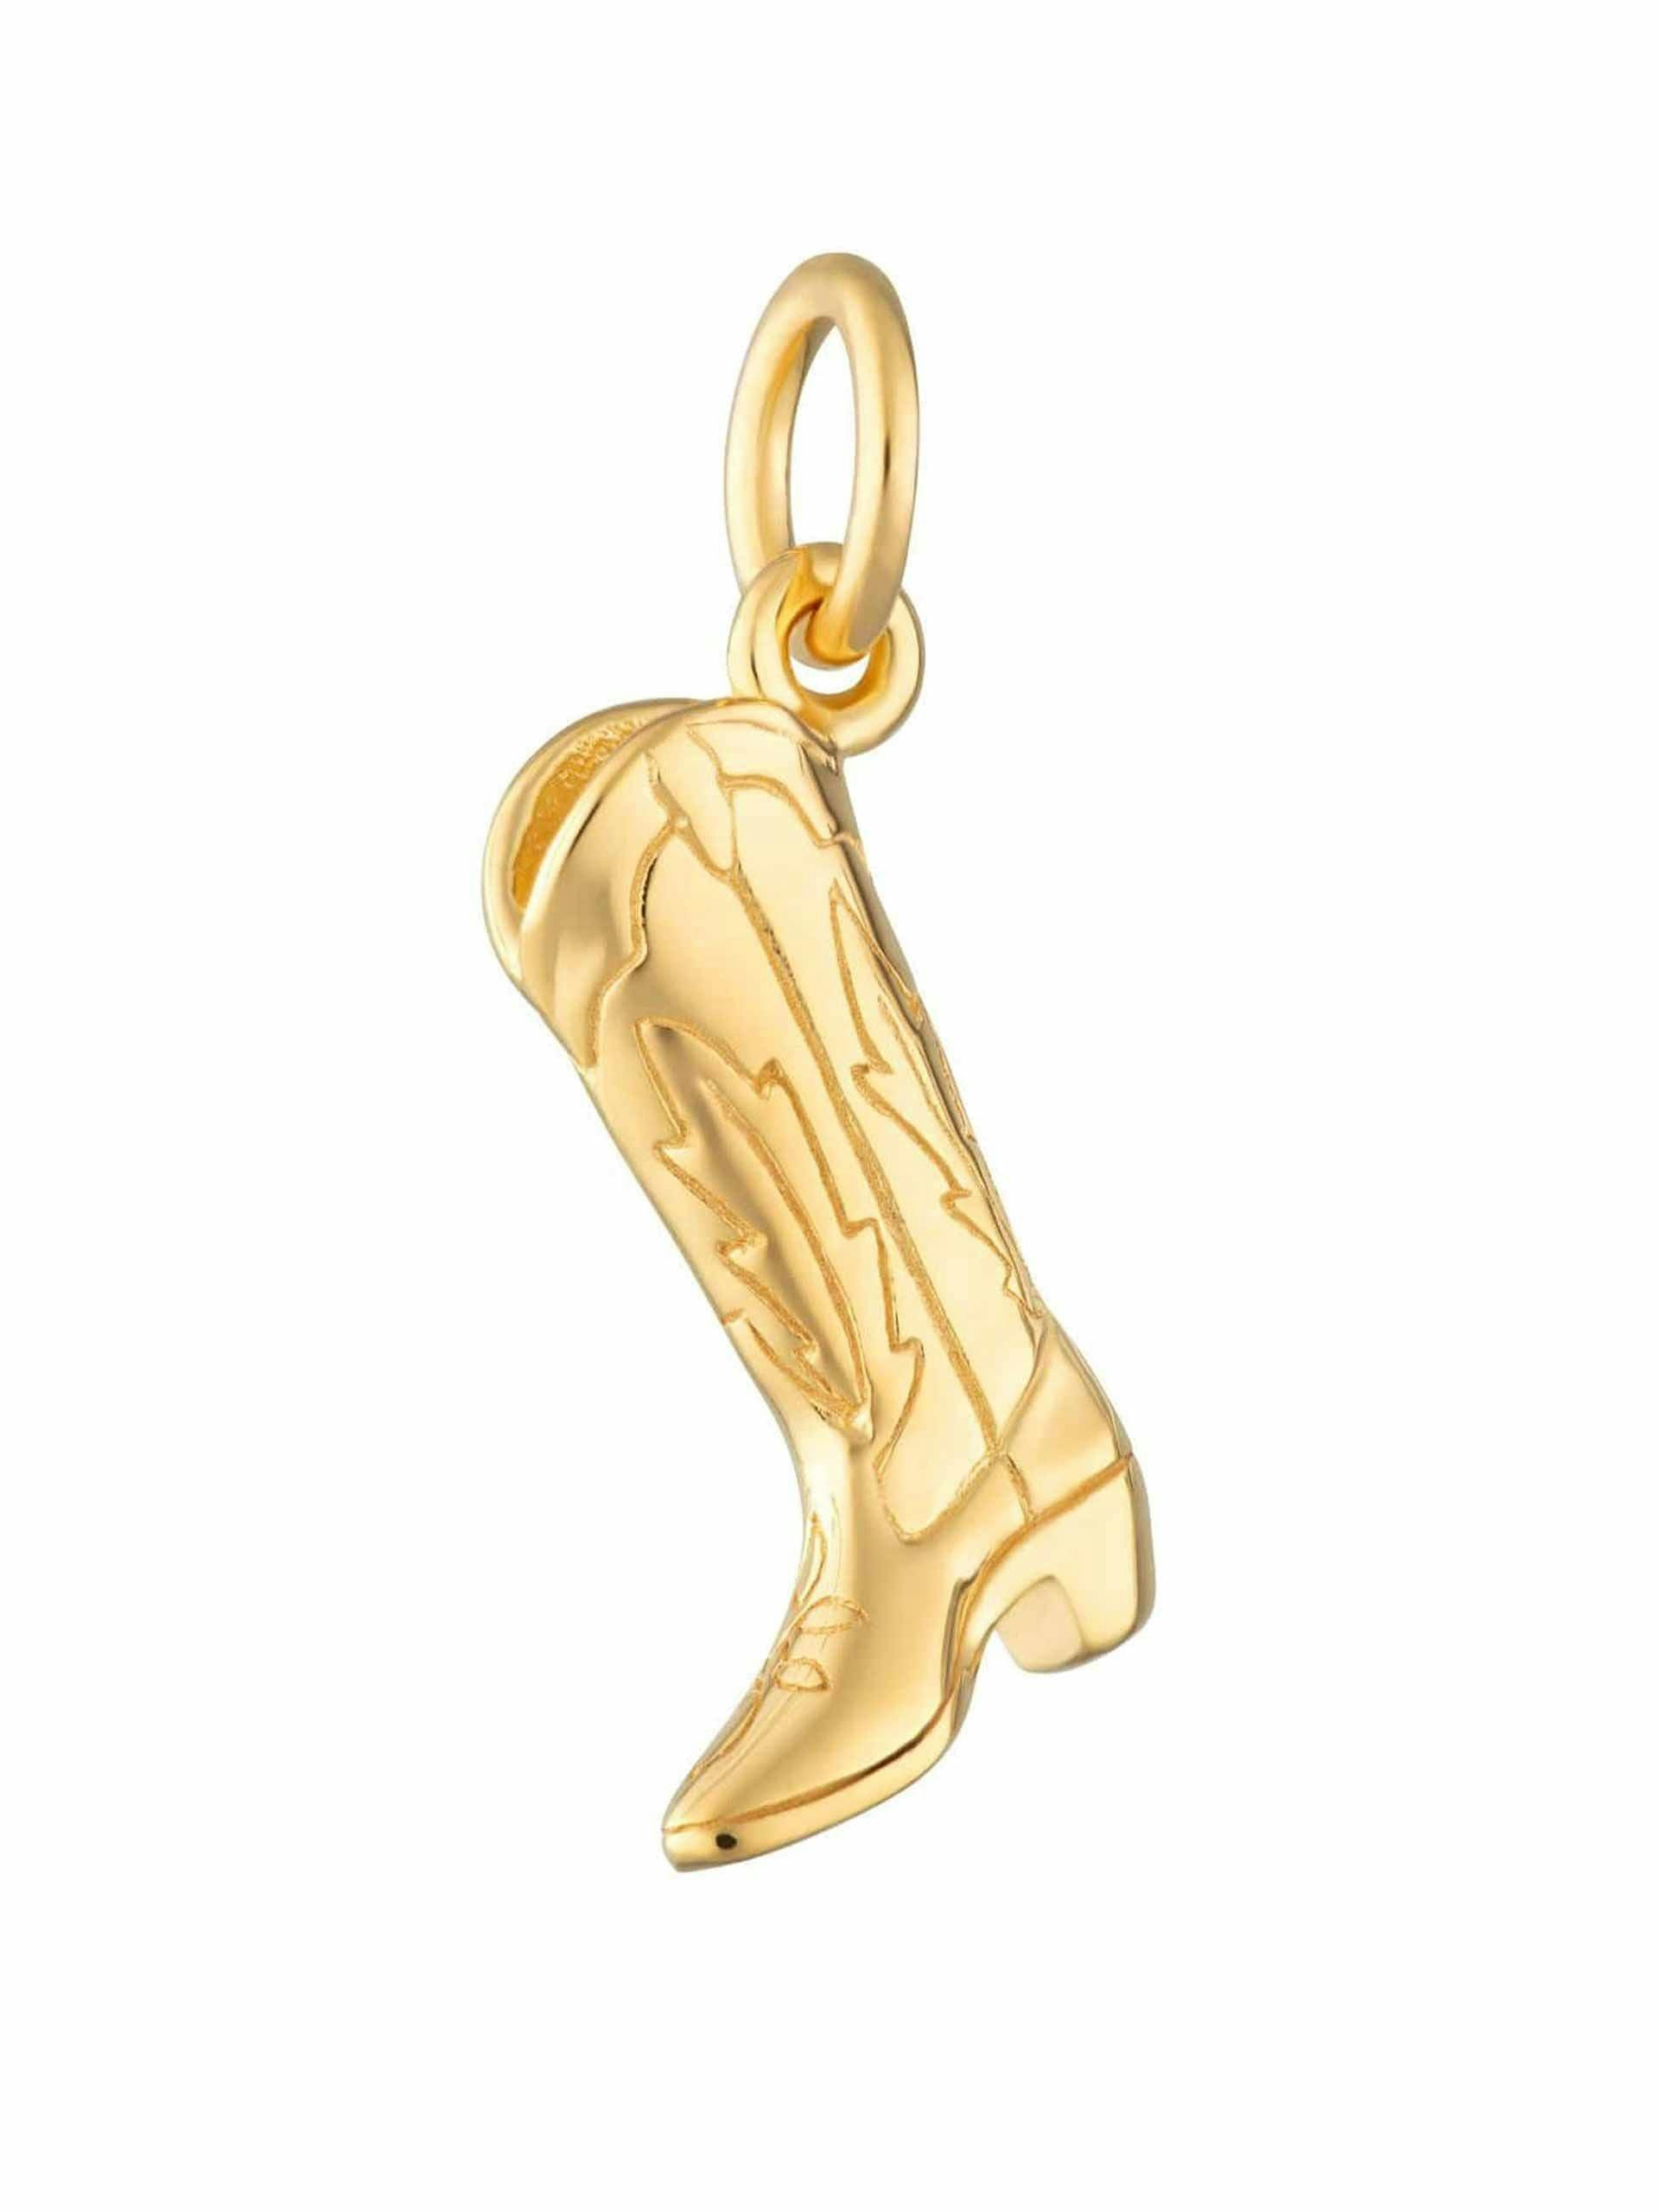 Gold plated cowboy boot charm